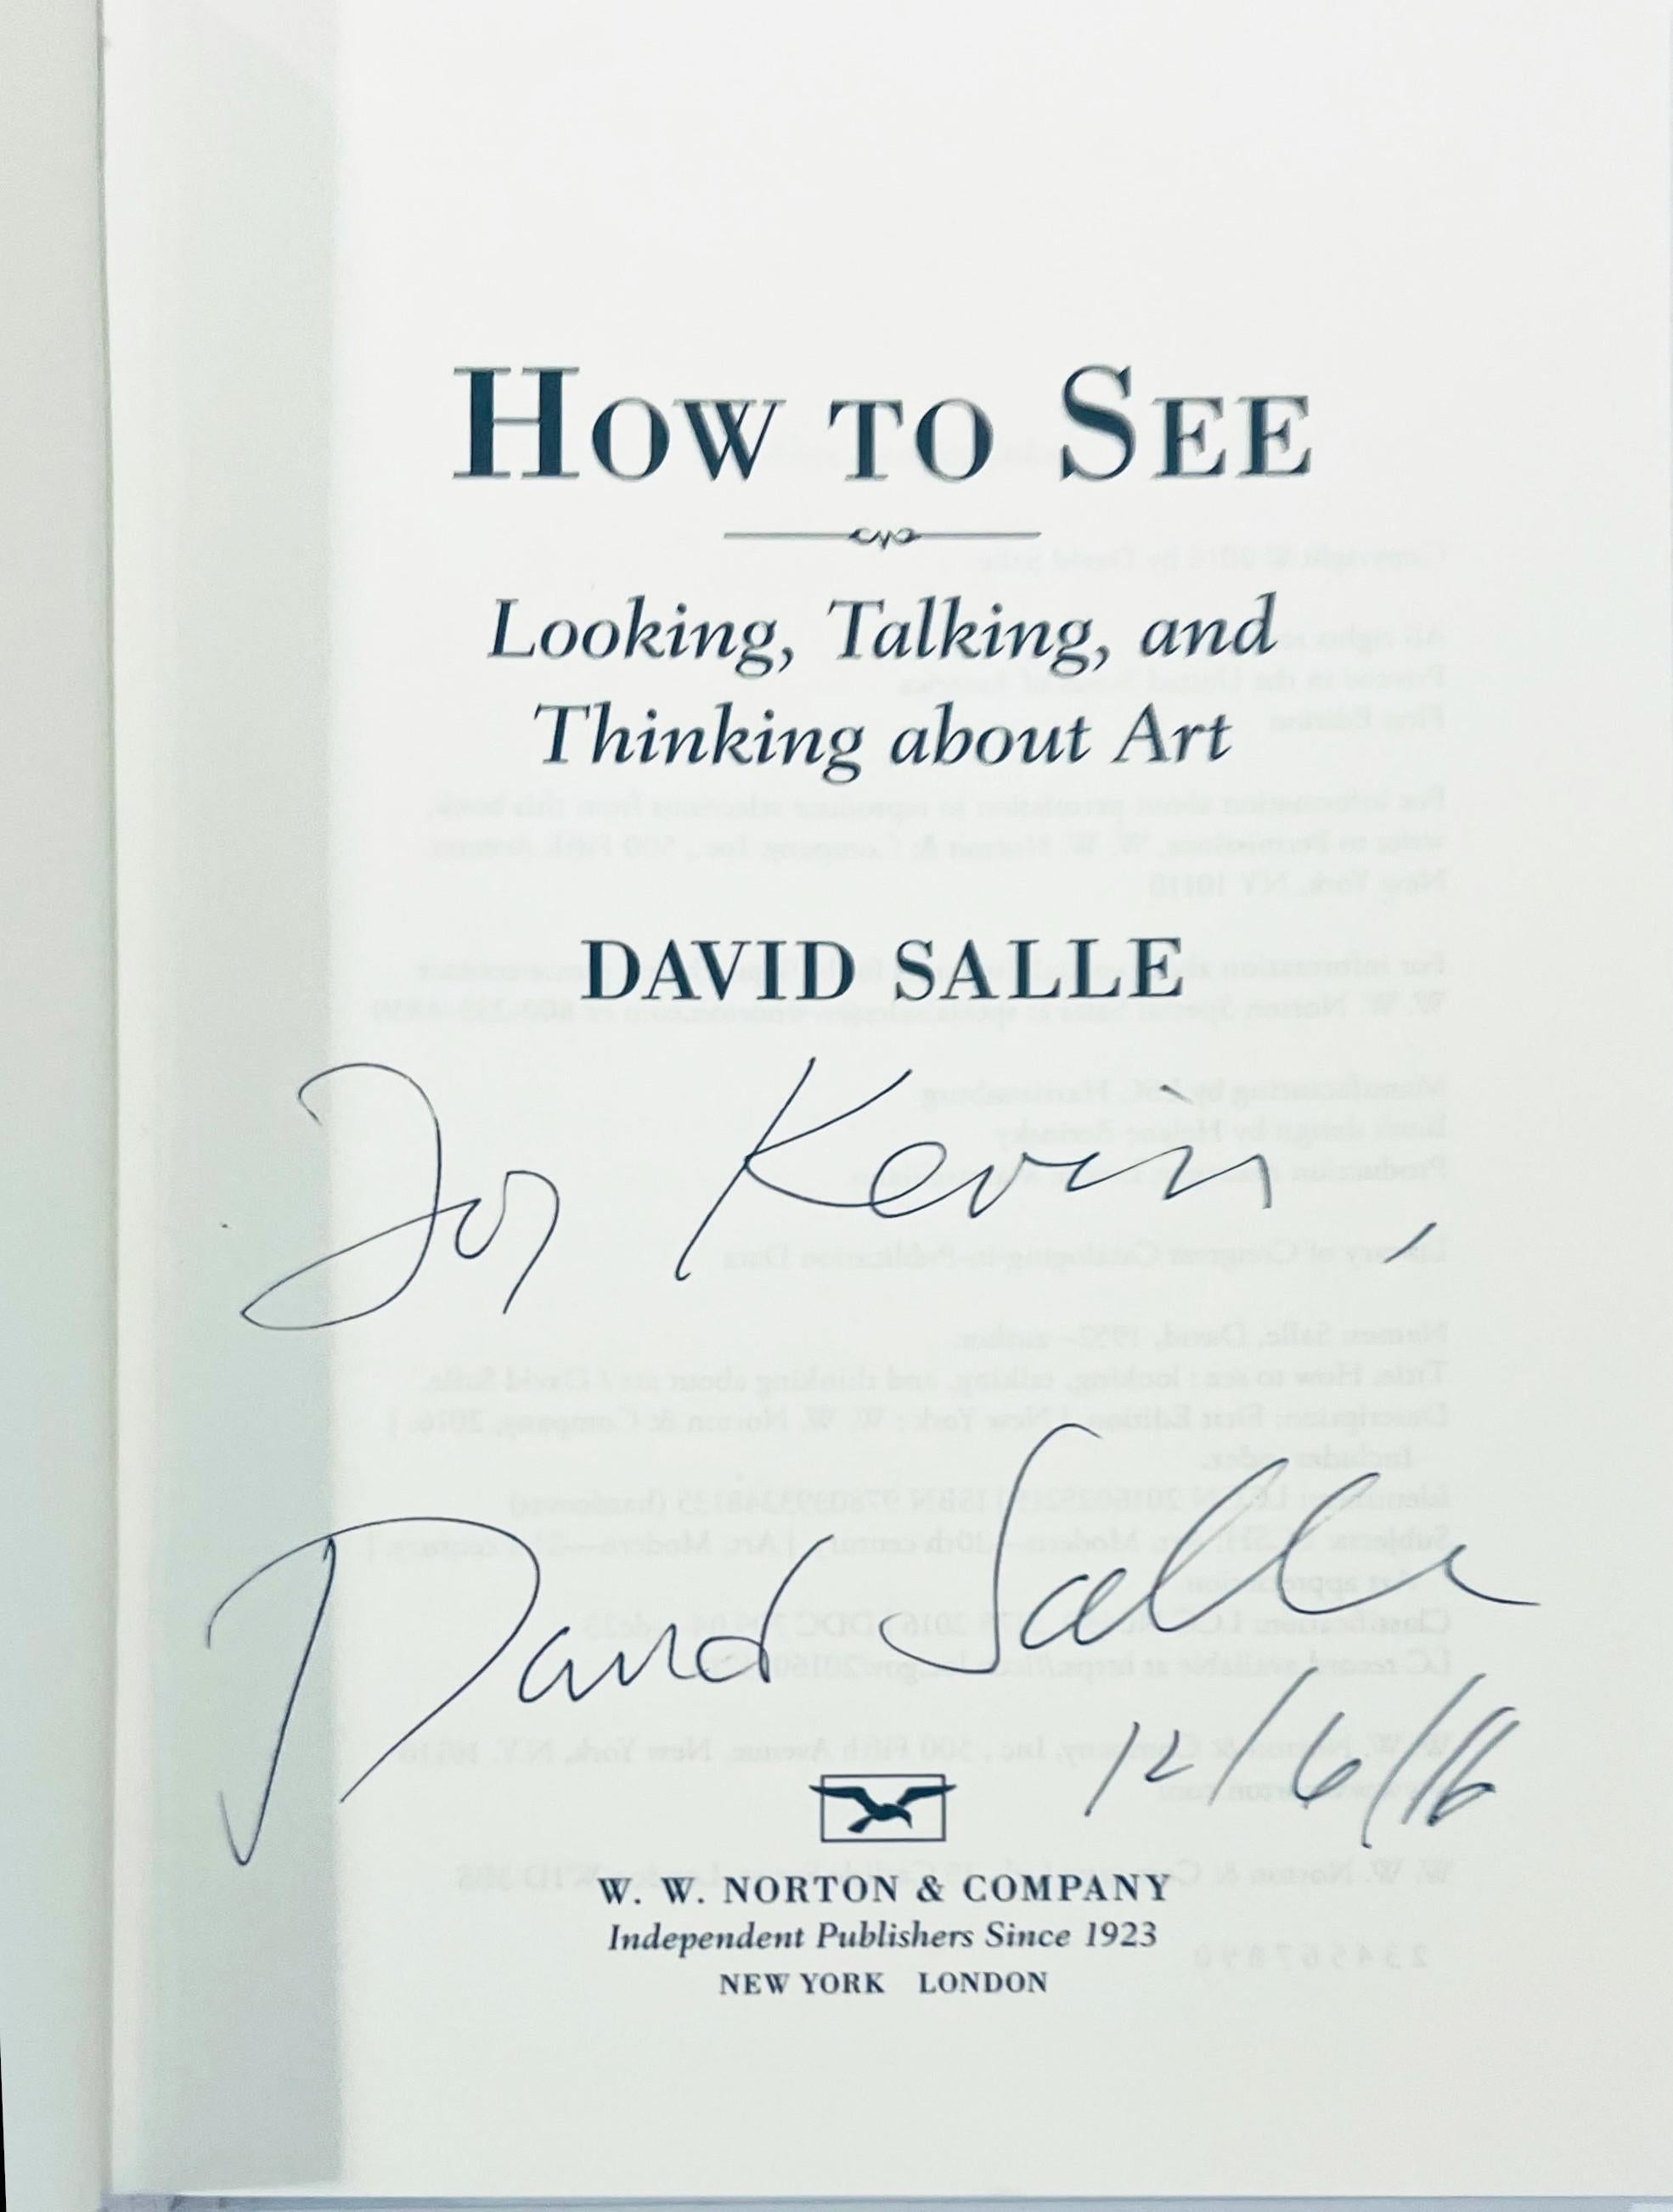 HOW TO SEE Looking, Talking and Thinking about Art (signé à la main par David Salle) en vente 6